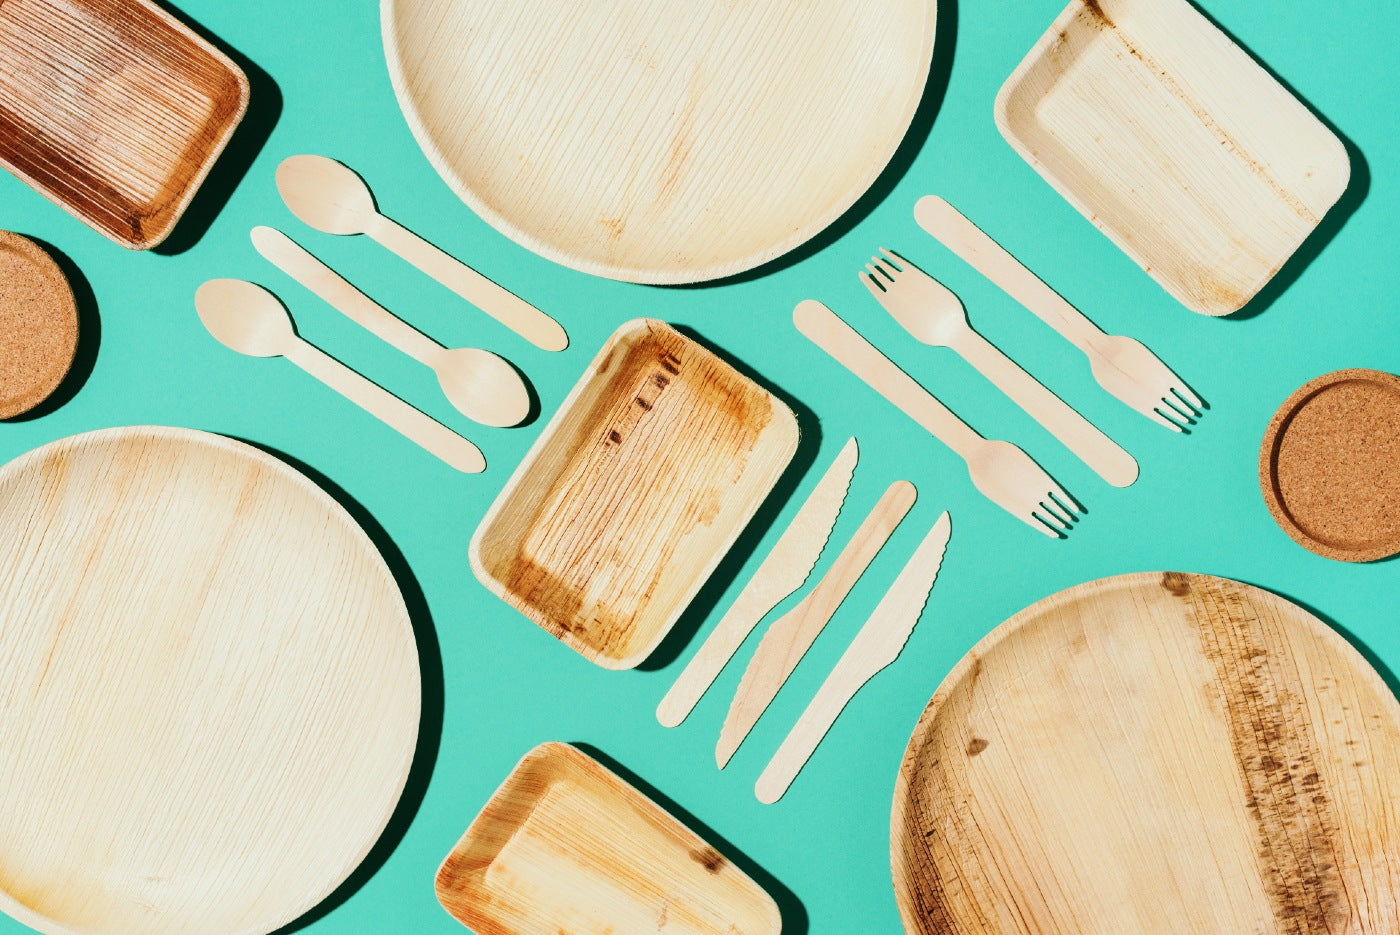 Palm Leaf Plates Vs. Bamboo Plates: Which One Is Better?